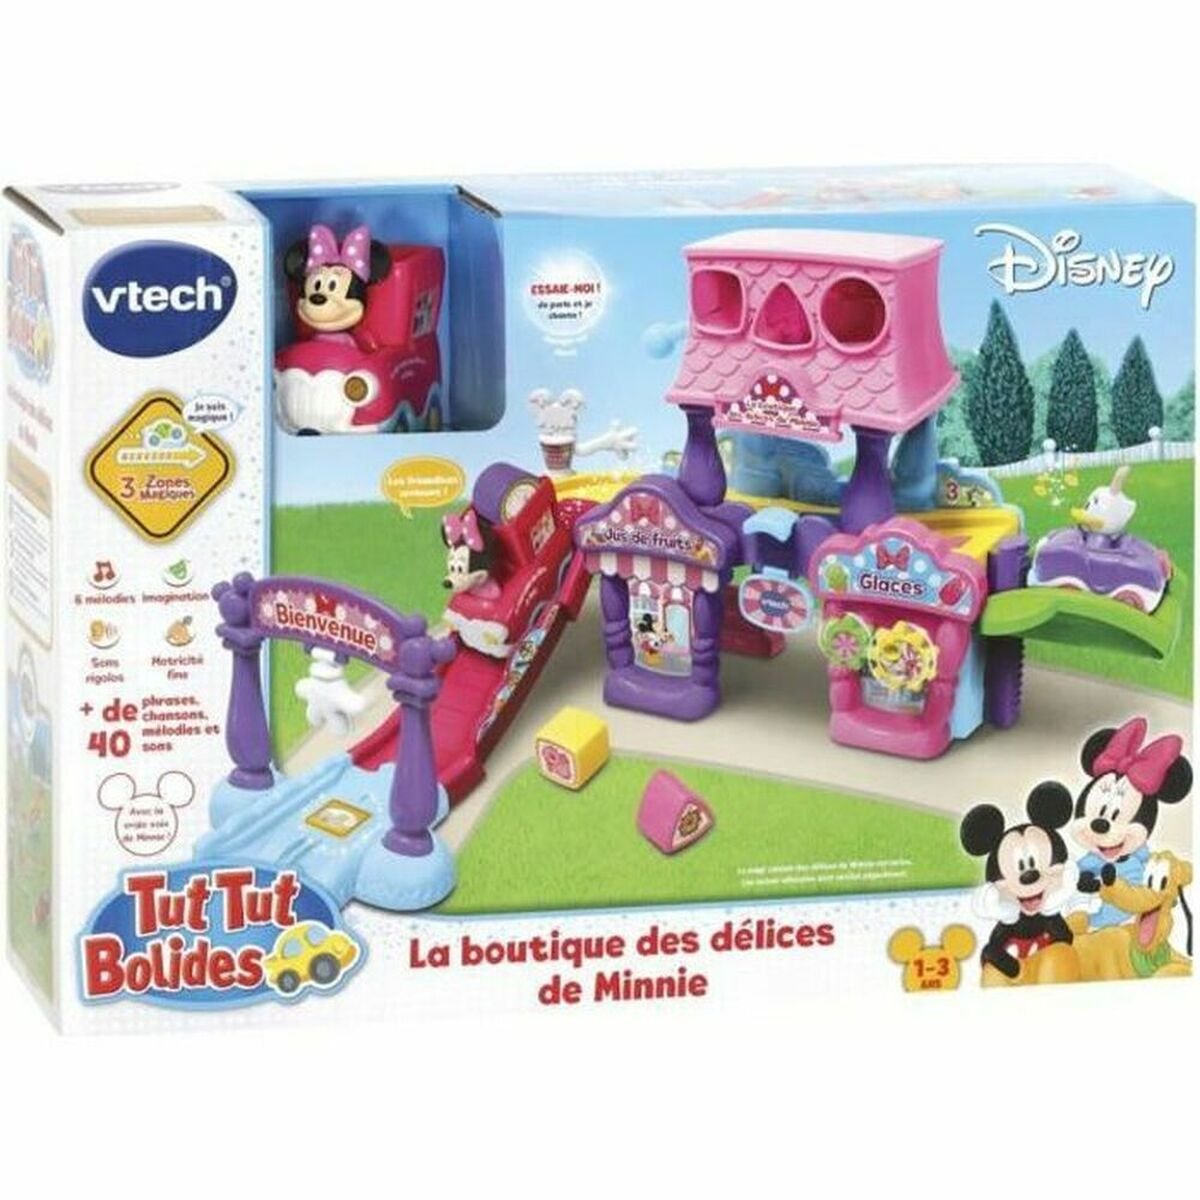 Playset Vtech Minnie's Delights Boutique (S7156410)